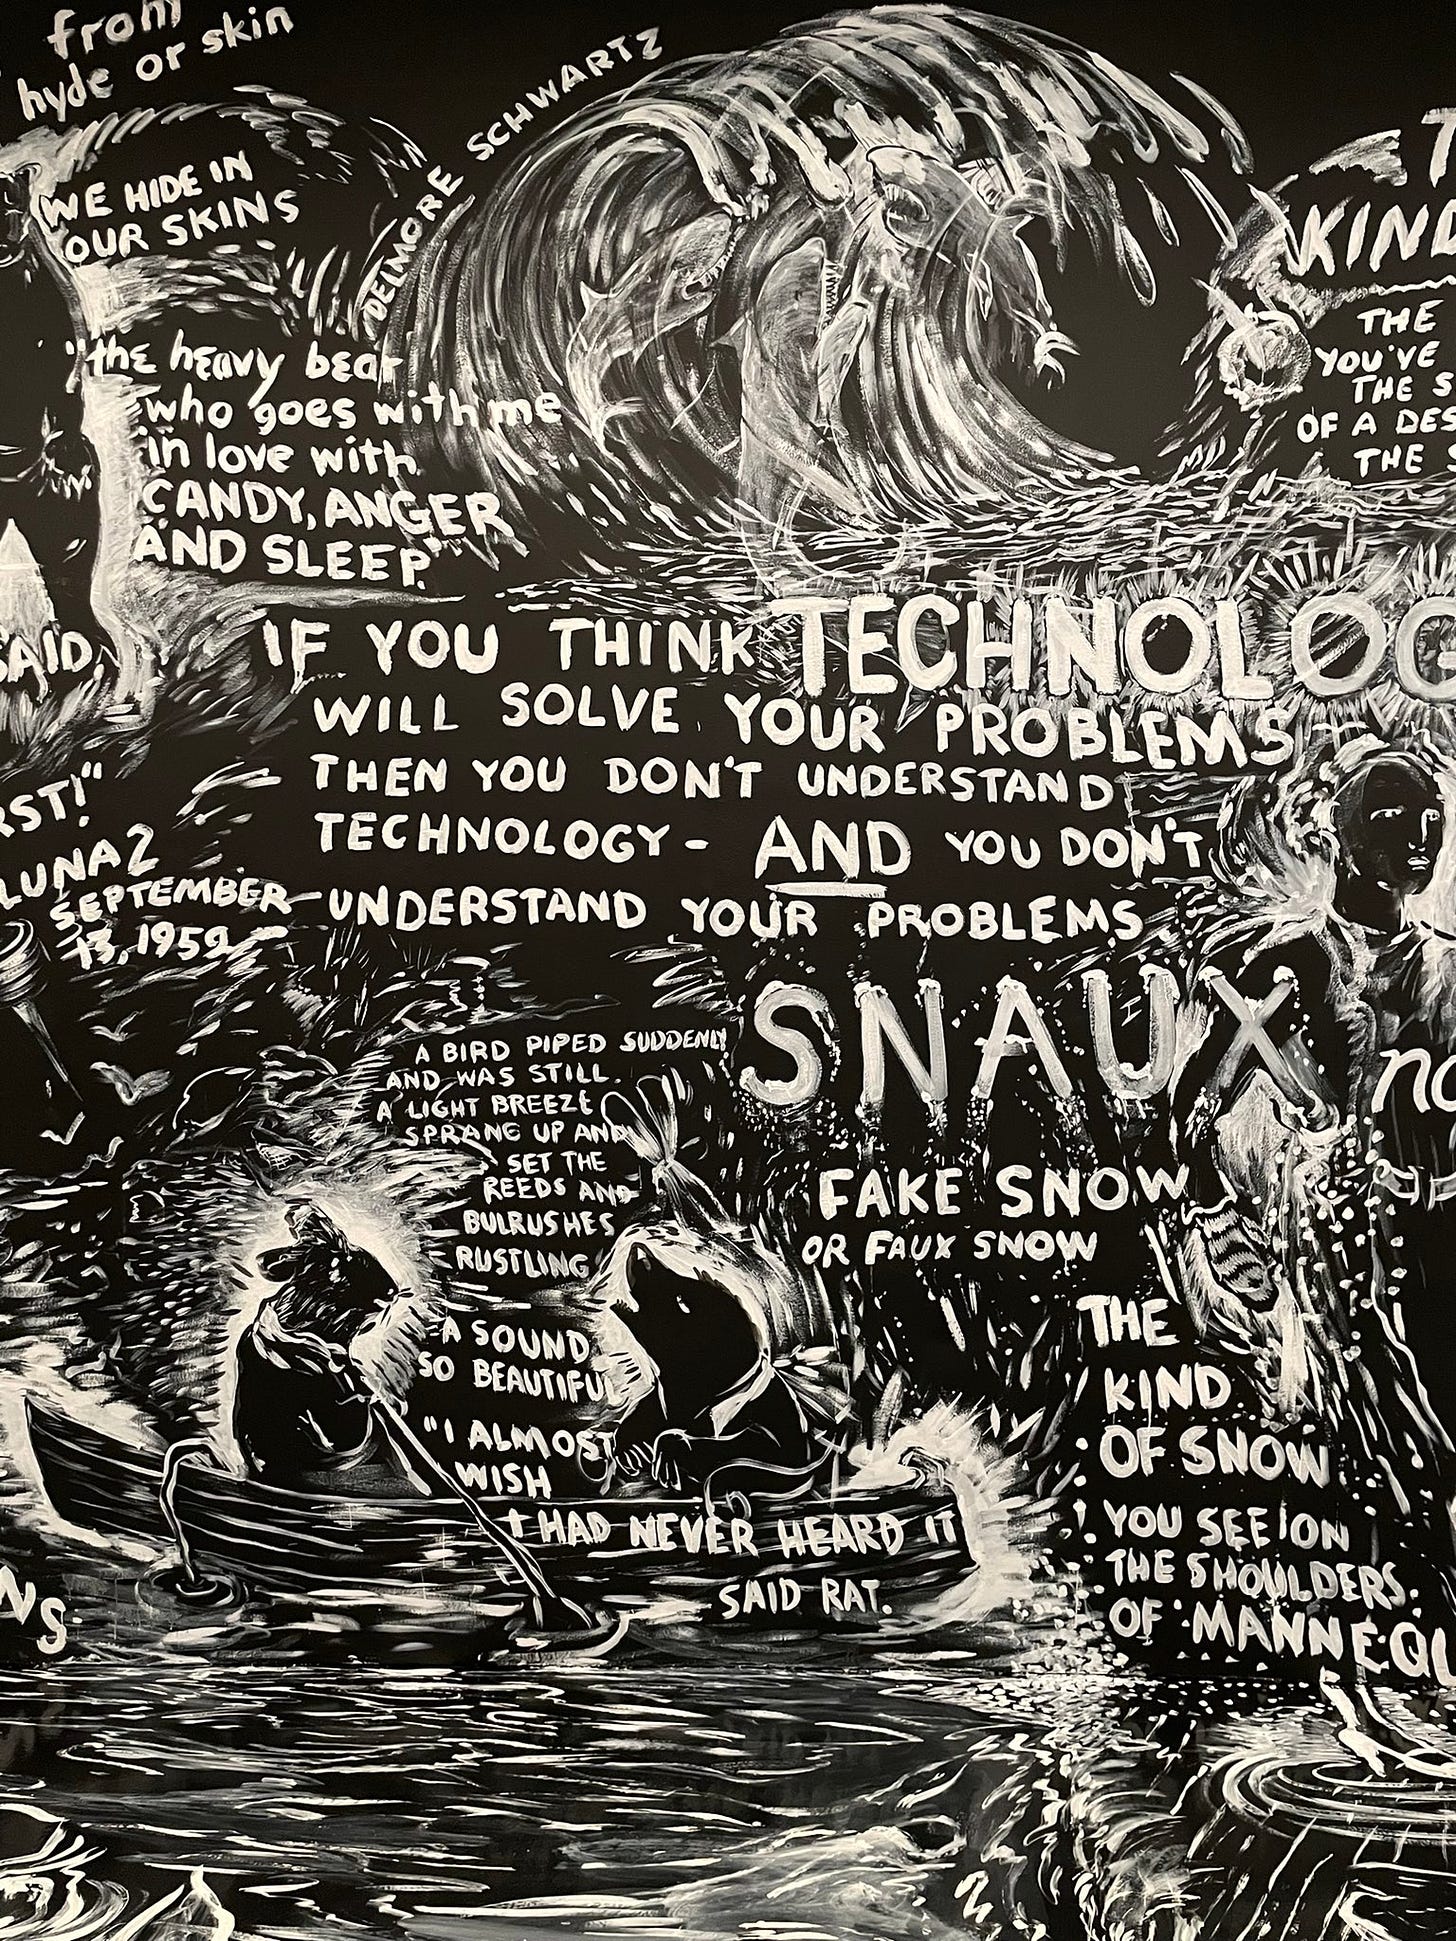 Image from Laurie Anderson’s piece “Four Talks”. Floors and walls of a room painted black with writing and images painted on top in white